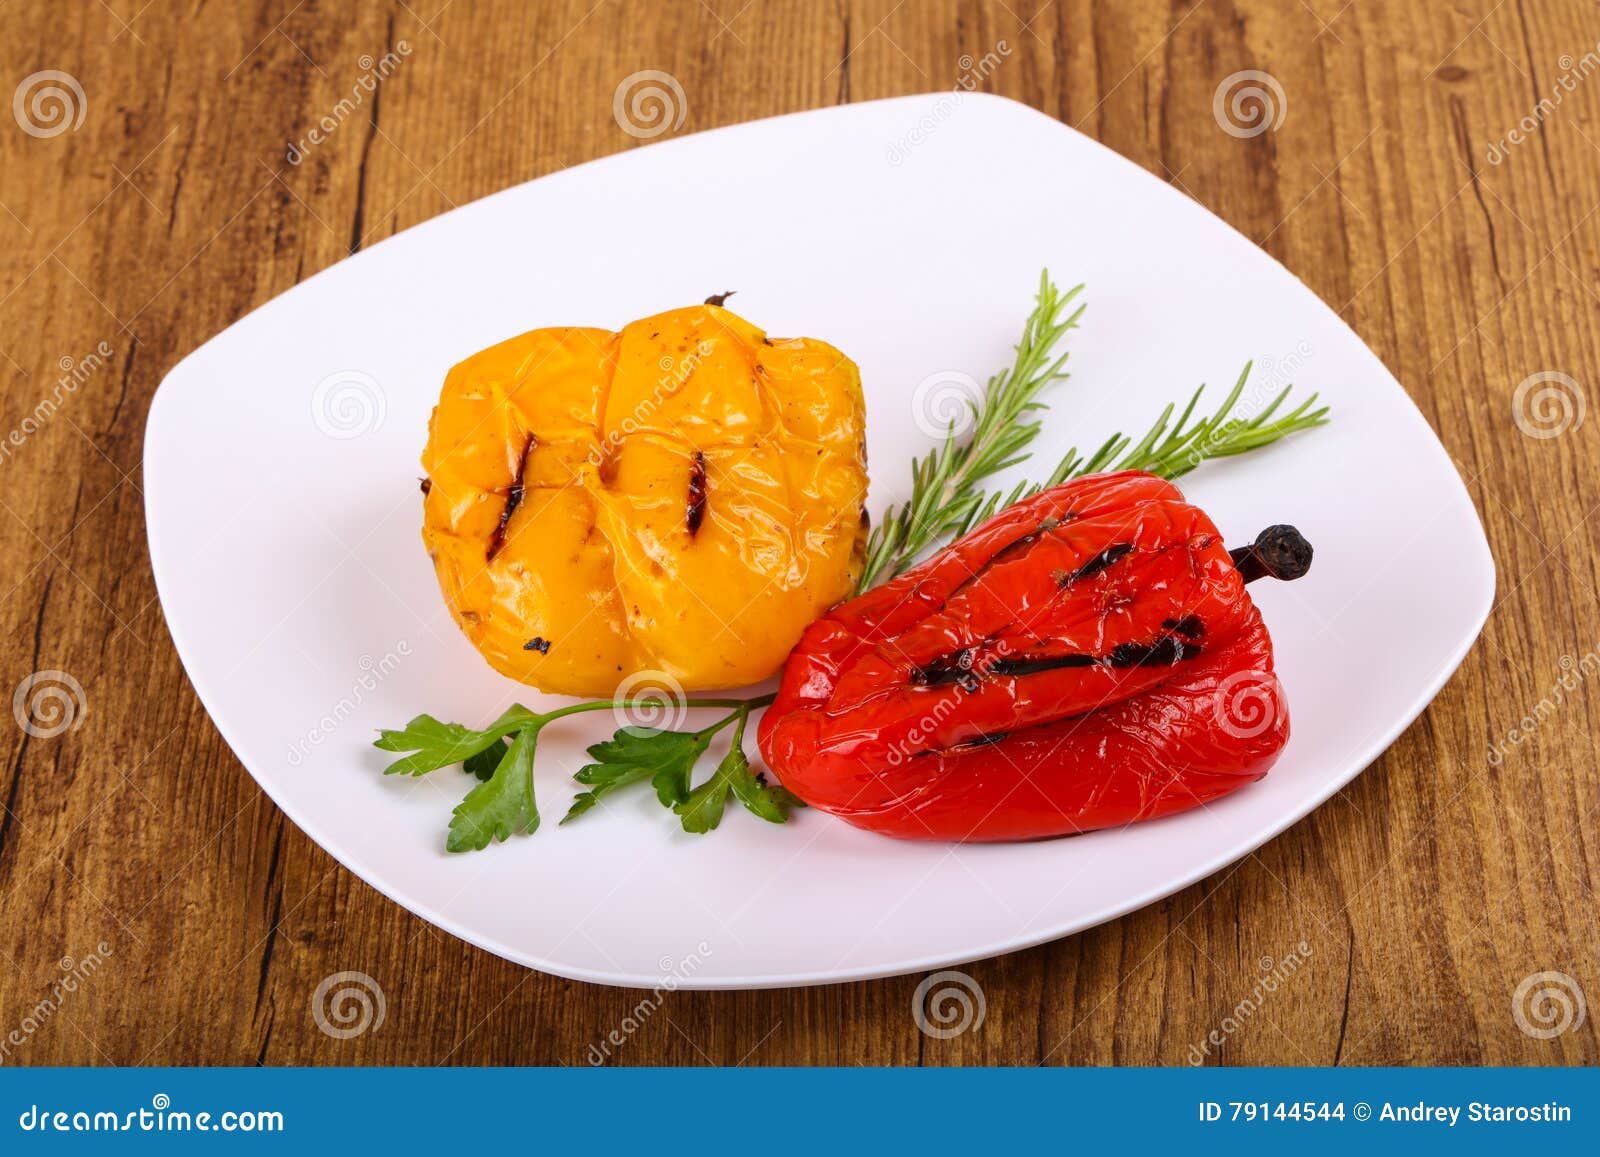 Grilled Bell Peppers stock photo. Image of barbecue, dinner - 79144544